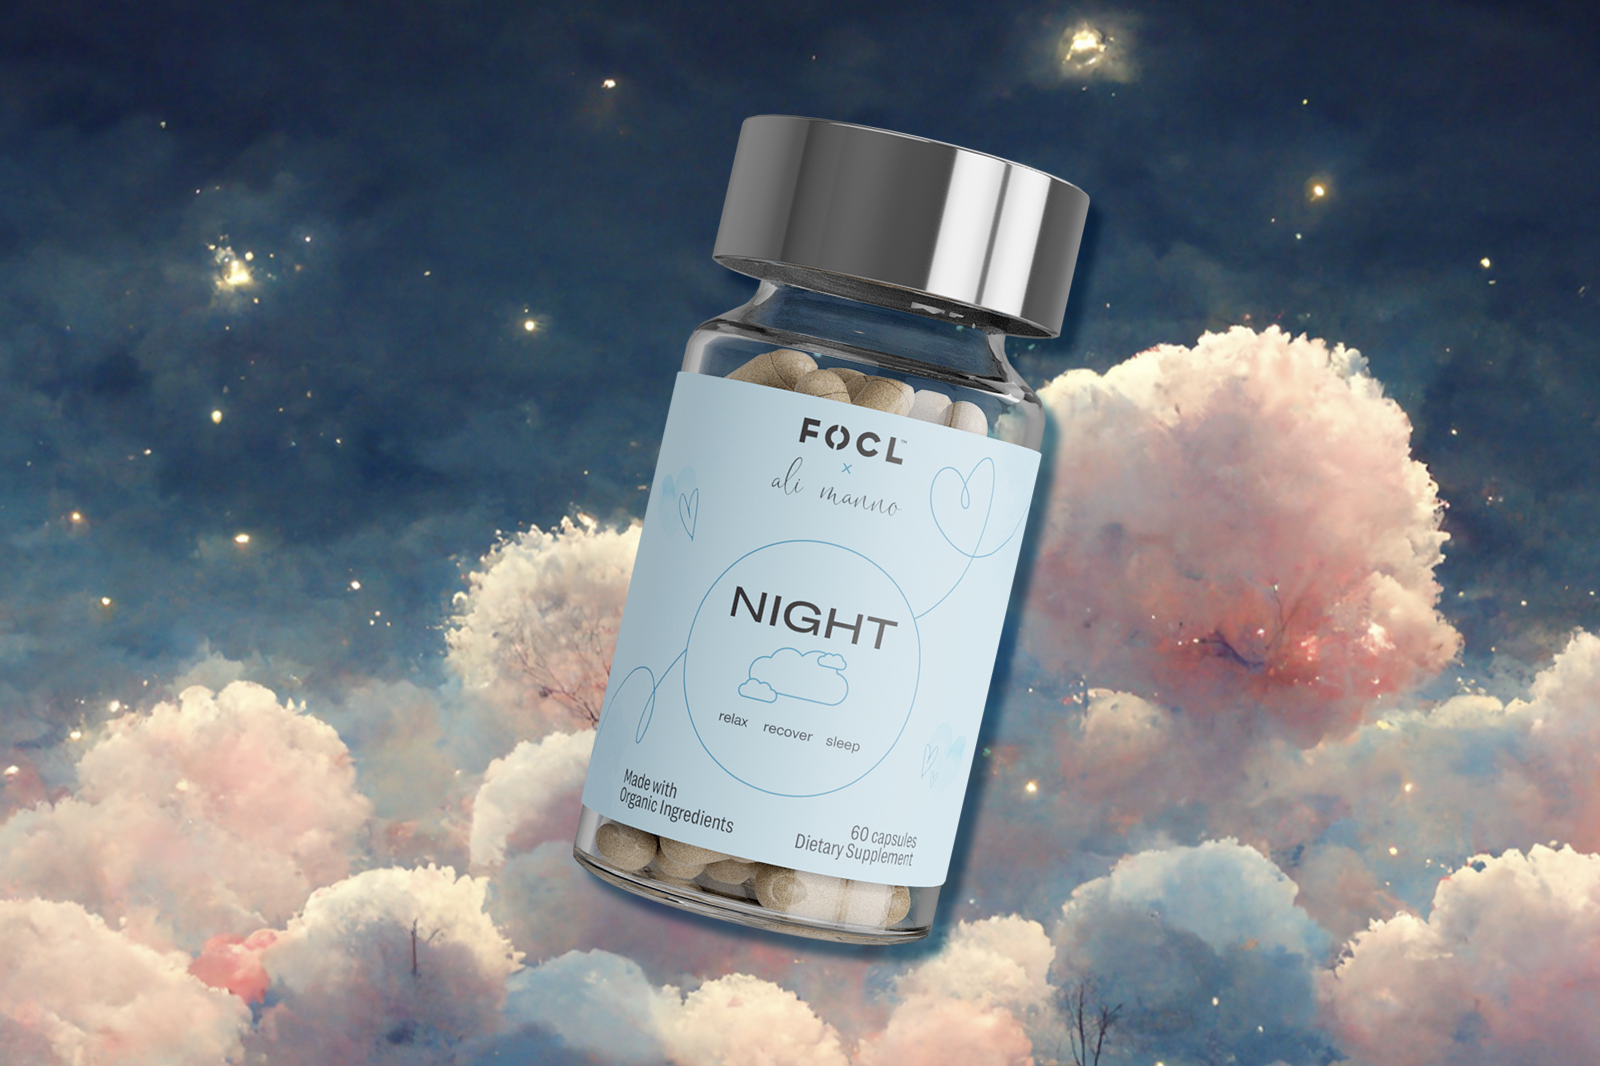 Bottle of FOCL x Ali Manno Night Capsules on a starry night background.